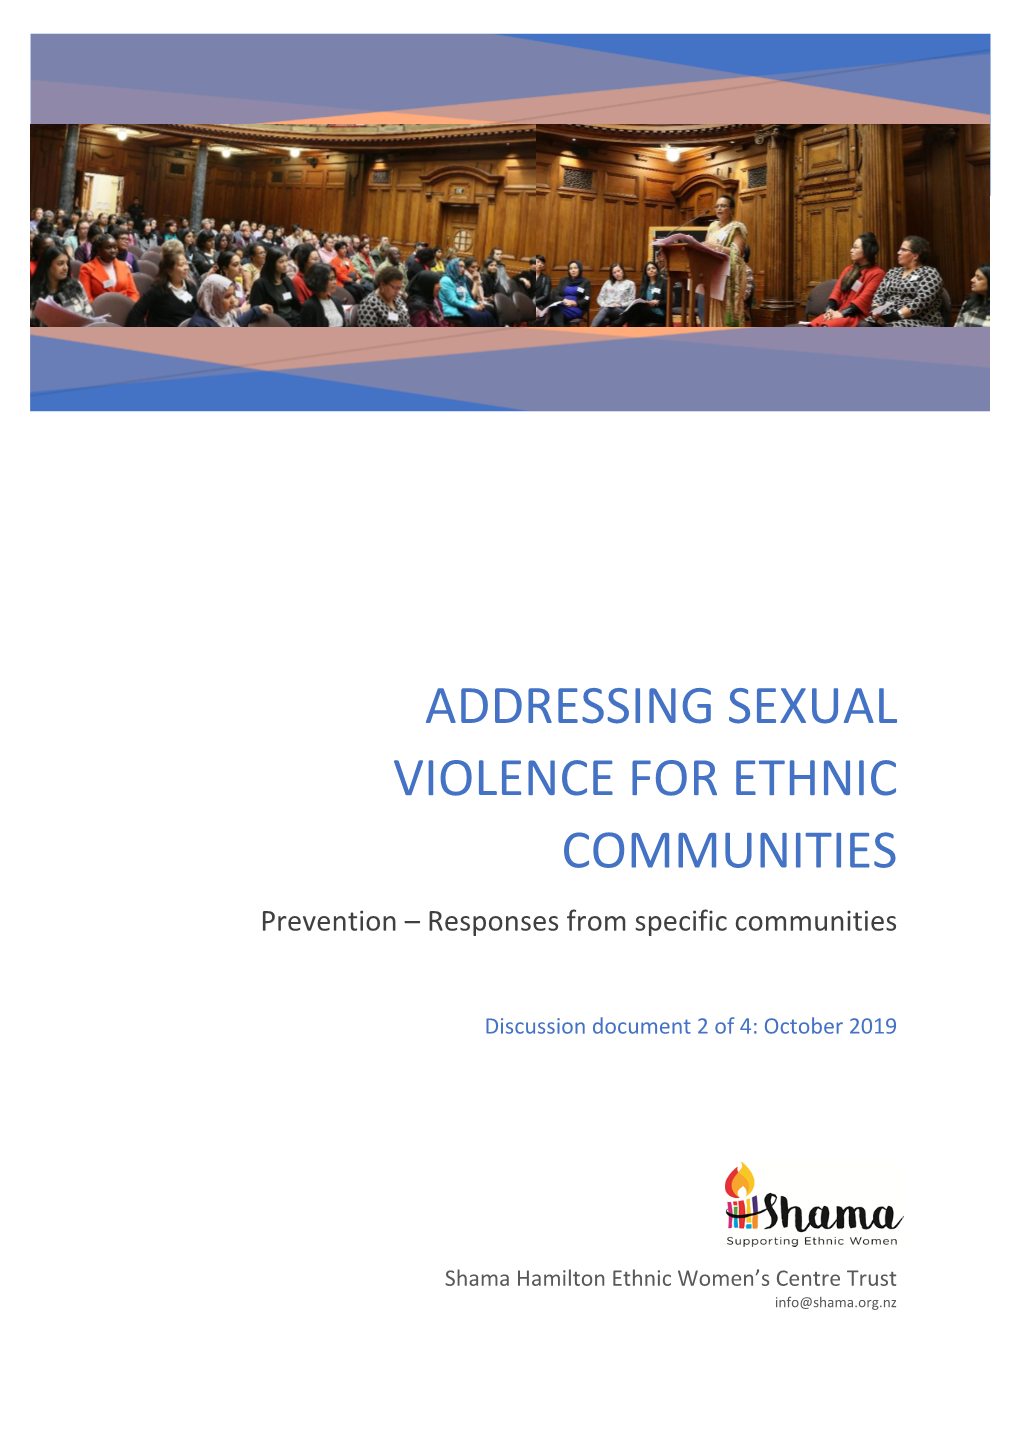 Addressing Sexual Violence for Ethnic Communities: Prevention